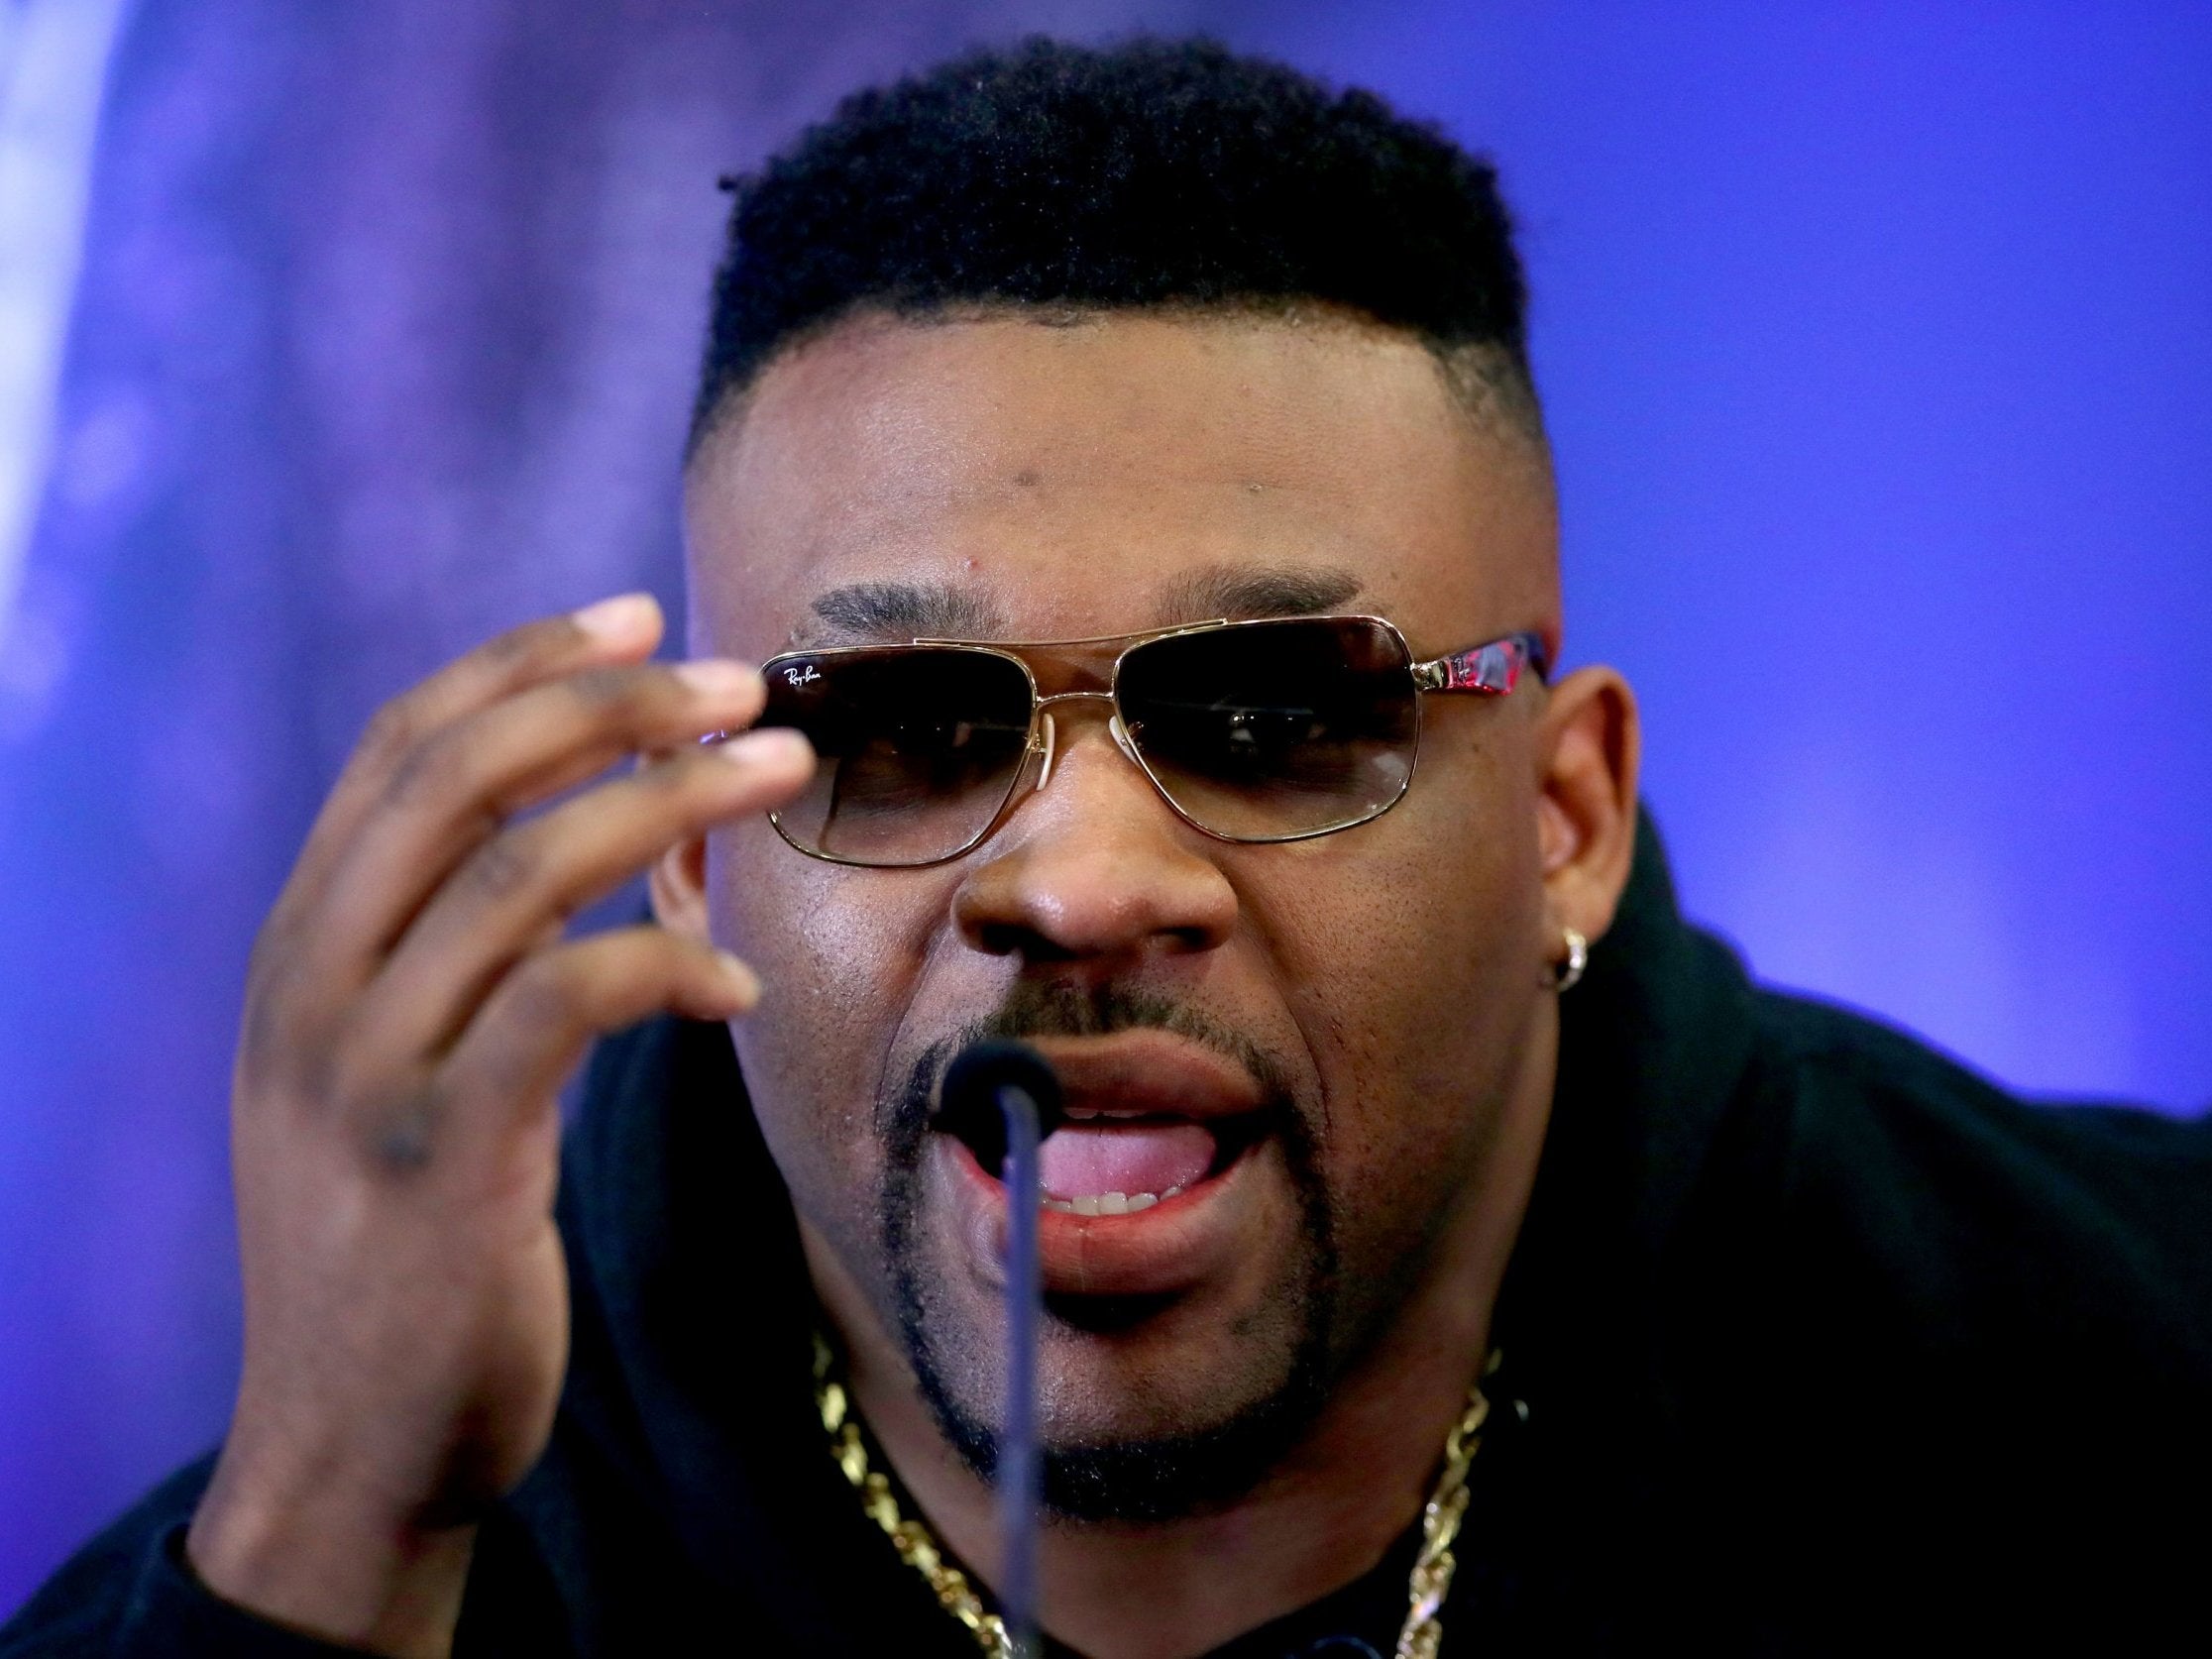 Jarrell Miller says he is “absolutely devastated” after his licence was revoked